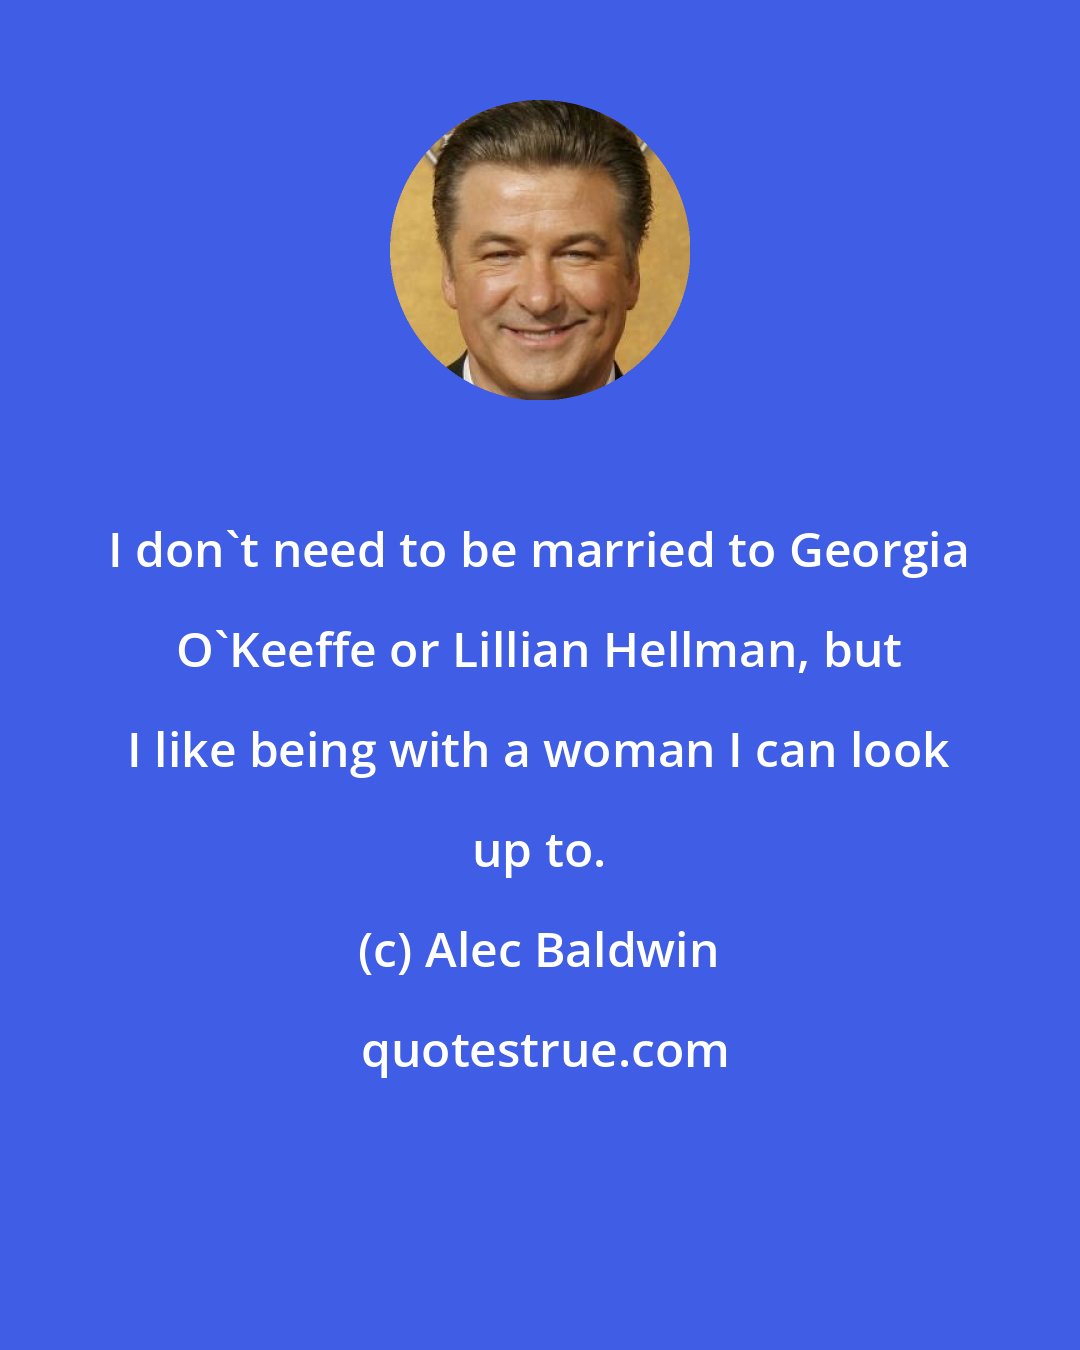 Alec Baldwin: I don't need to be married to Georgia O'Keeffe or Lillian Hellman, but I like being with a woman I can look up to.